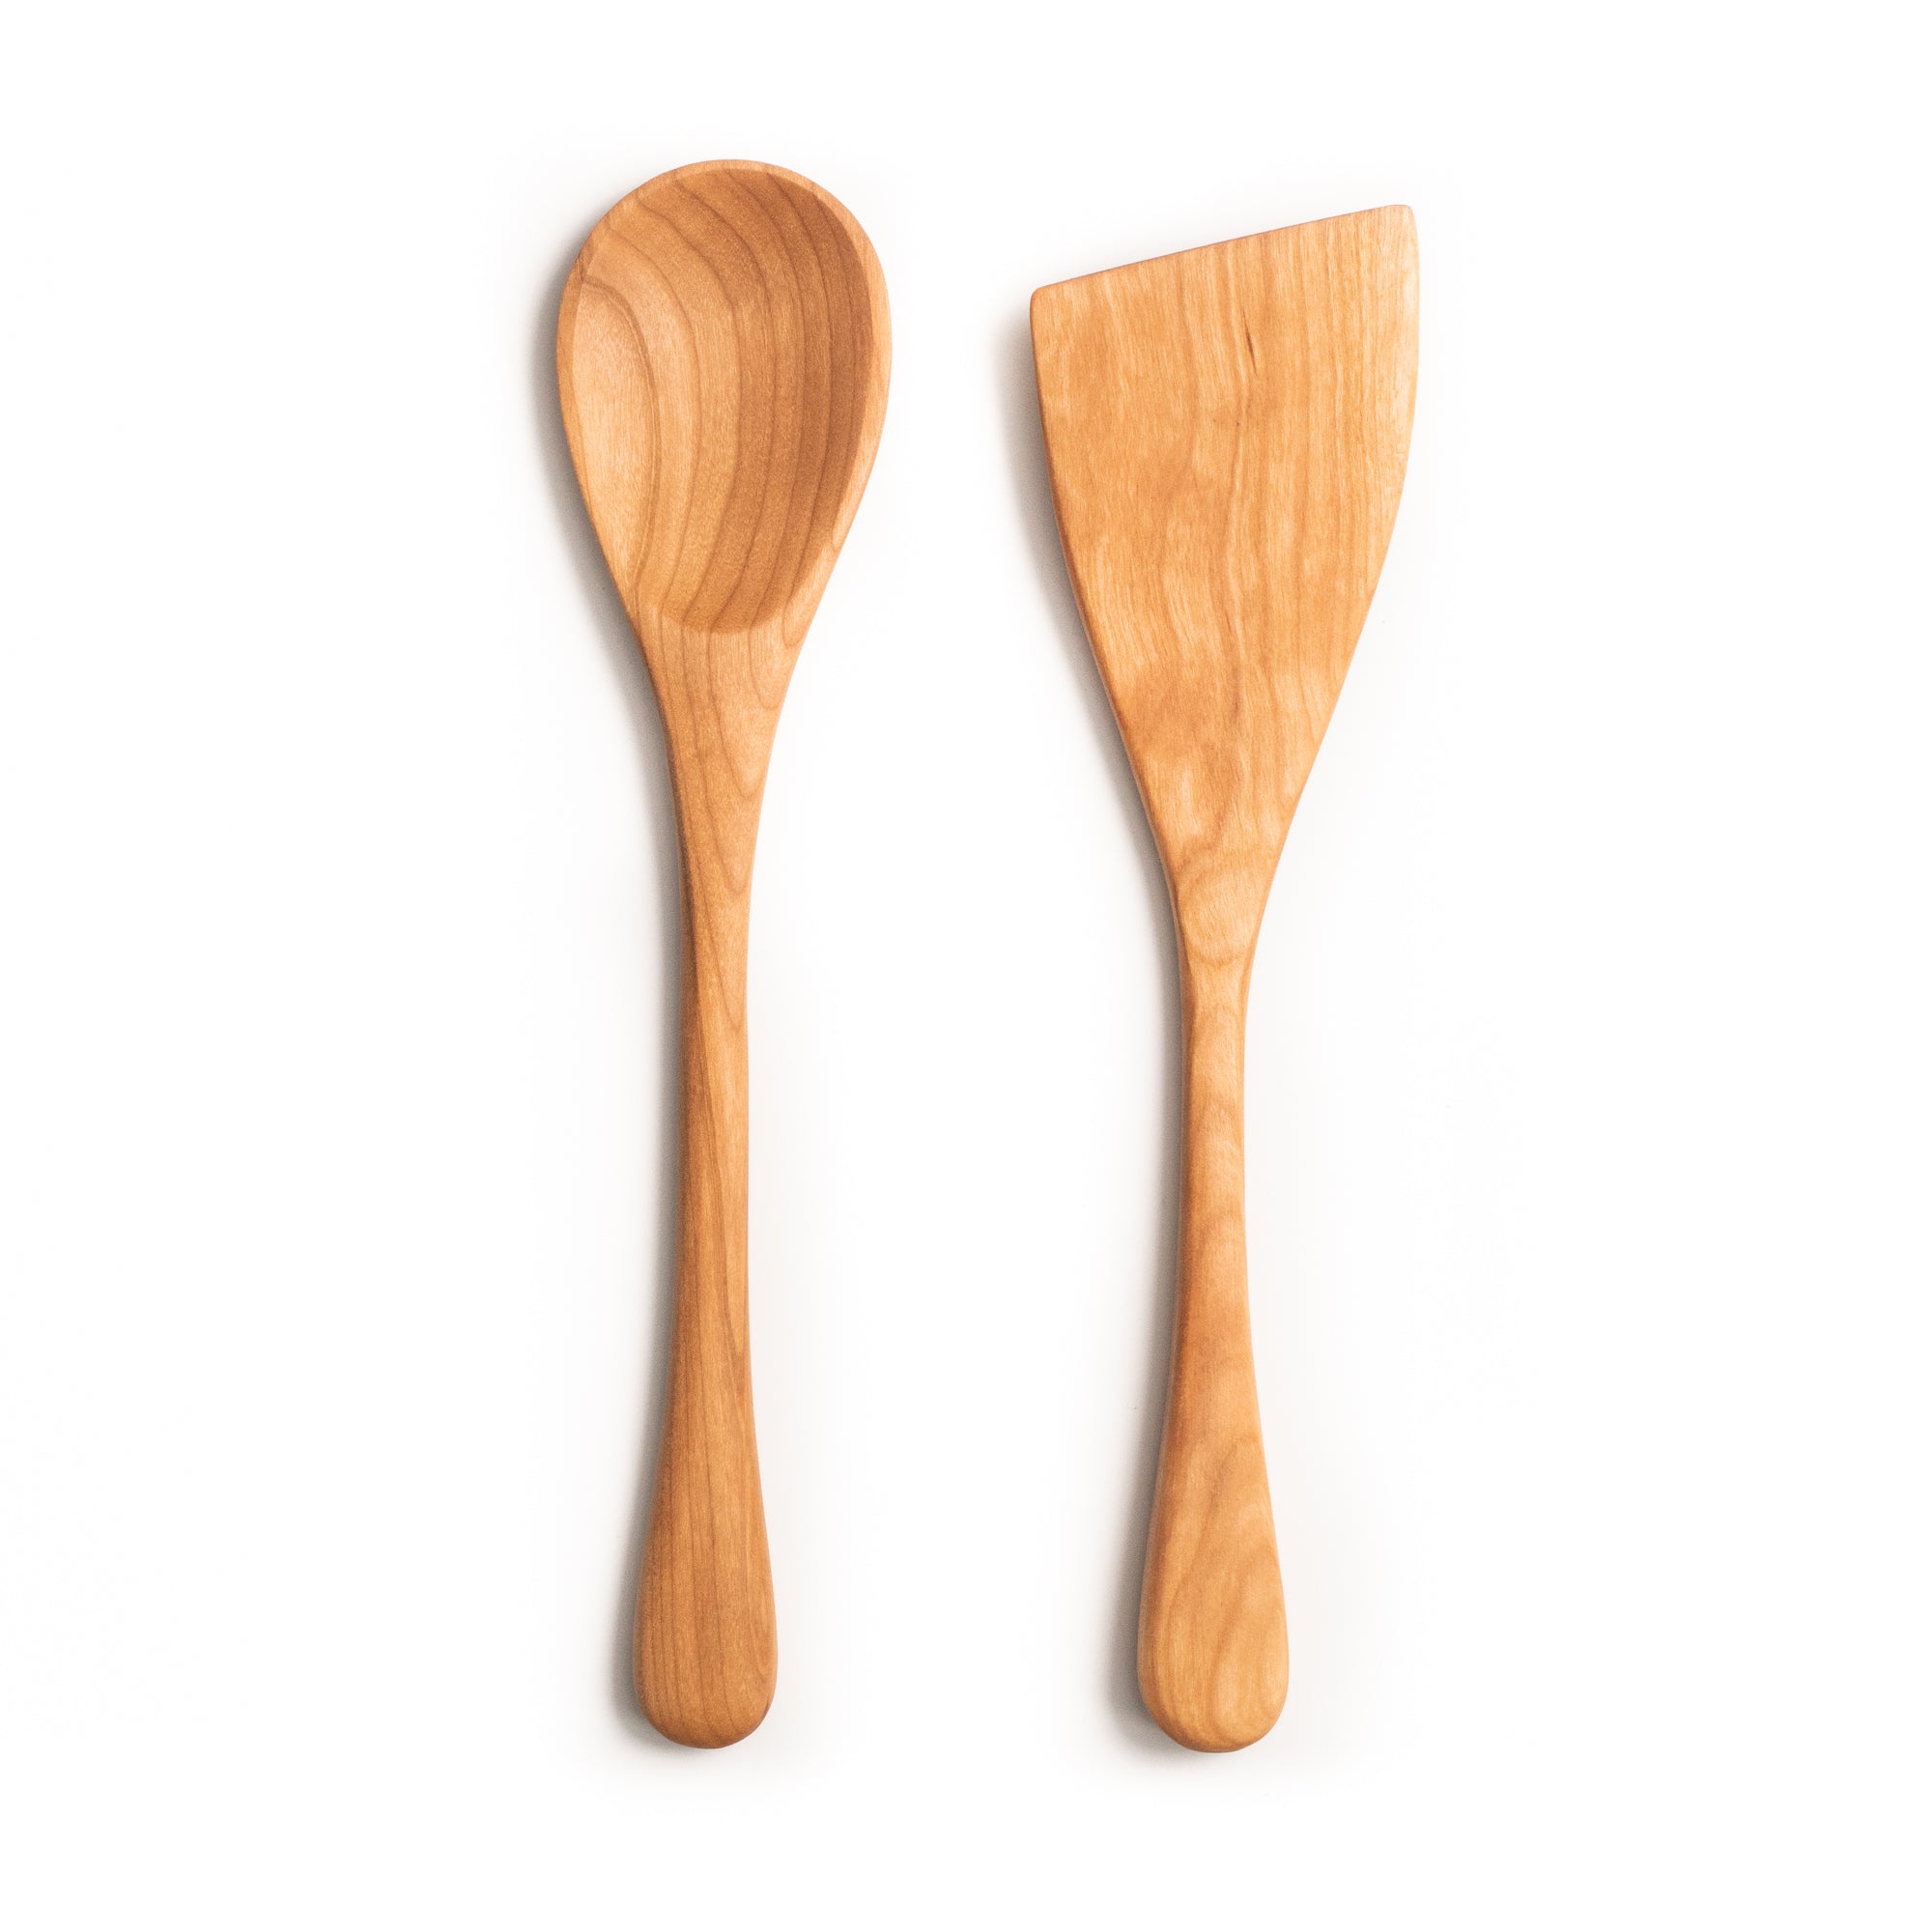 Lancaster Cast Iron Handmade Wooden Spoon & Spatula Set - 12 Cherry Wood, Hand Carved, Made in The USA with Pennsylvania Black Cherry Wood - Cook